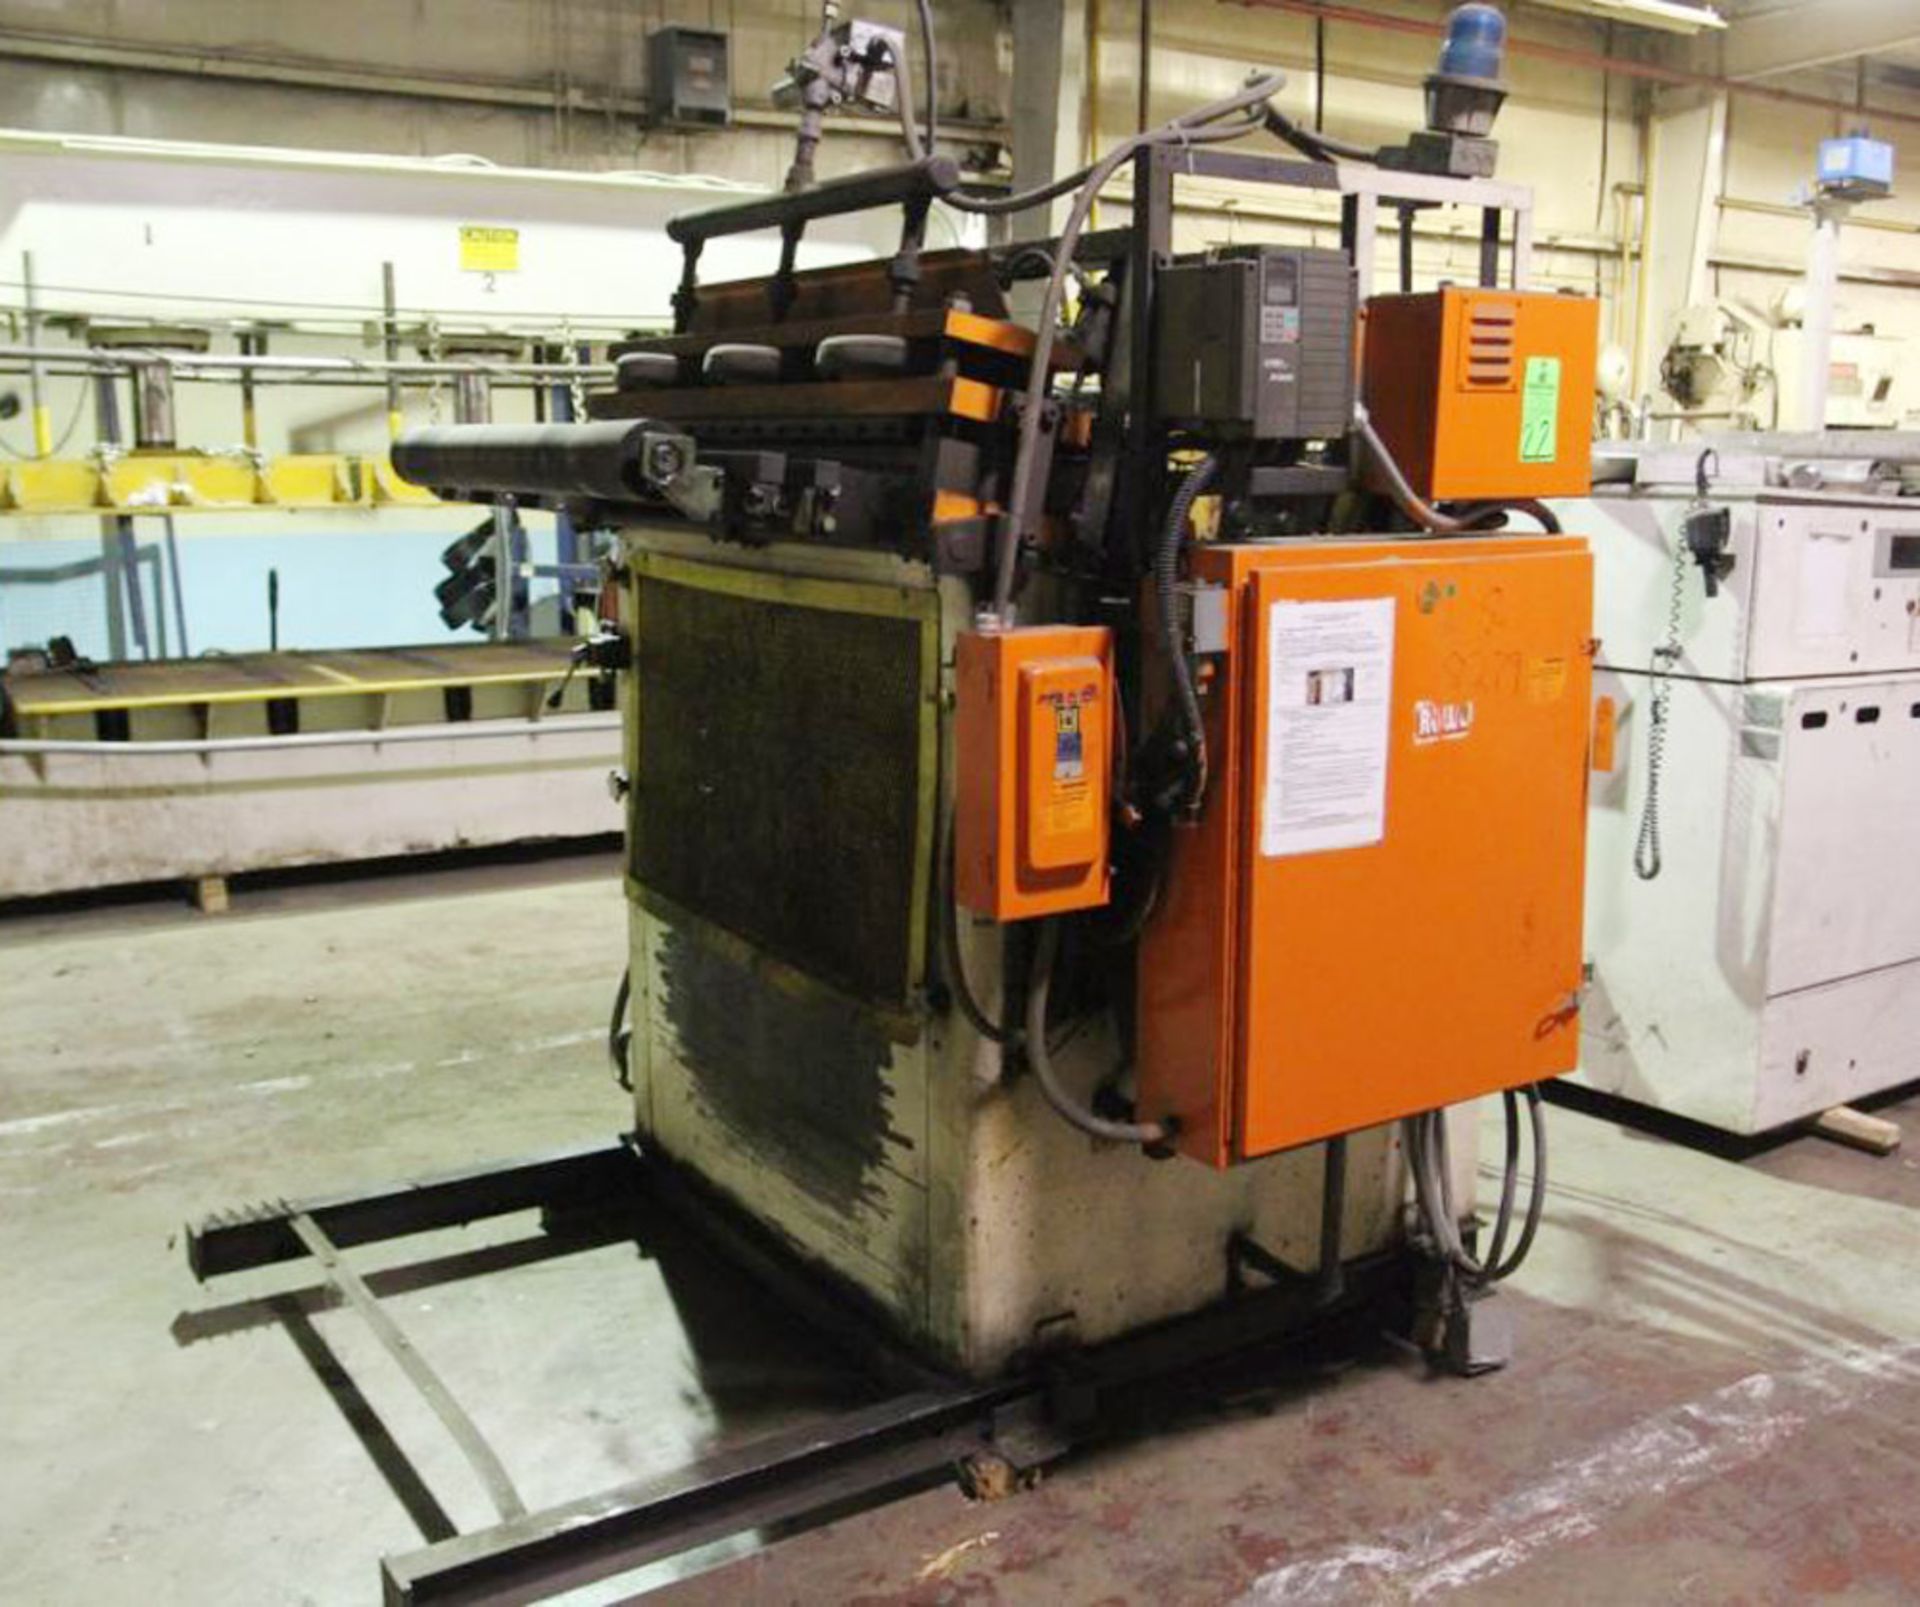 Rowe Coil Straightener, 40" x 0.110", Mdl: C3-40, S/N: 23043 (6987P) (Located In Painesville, OH)